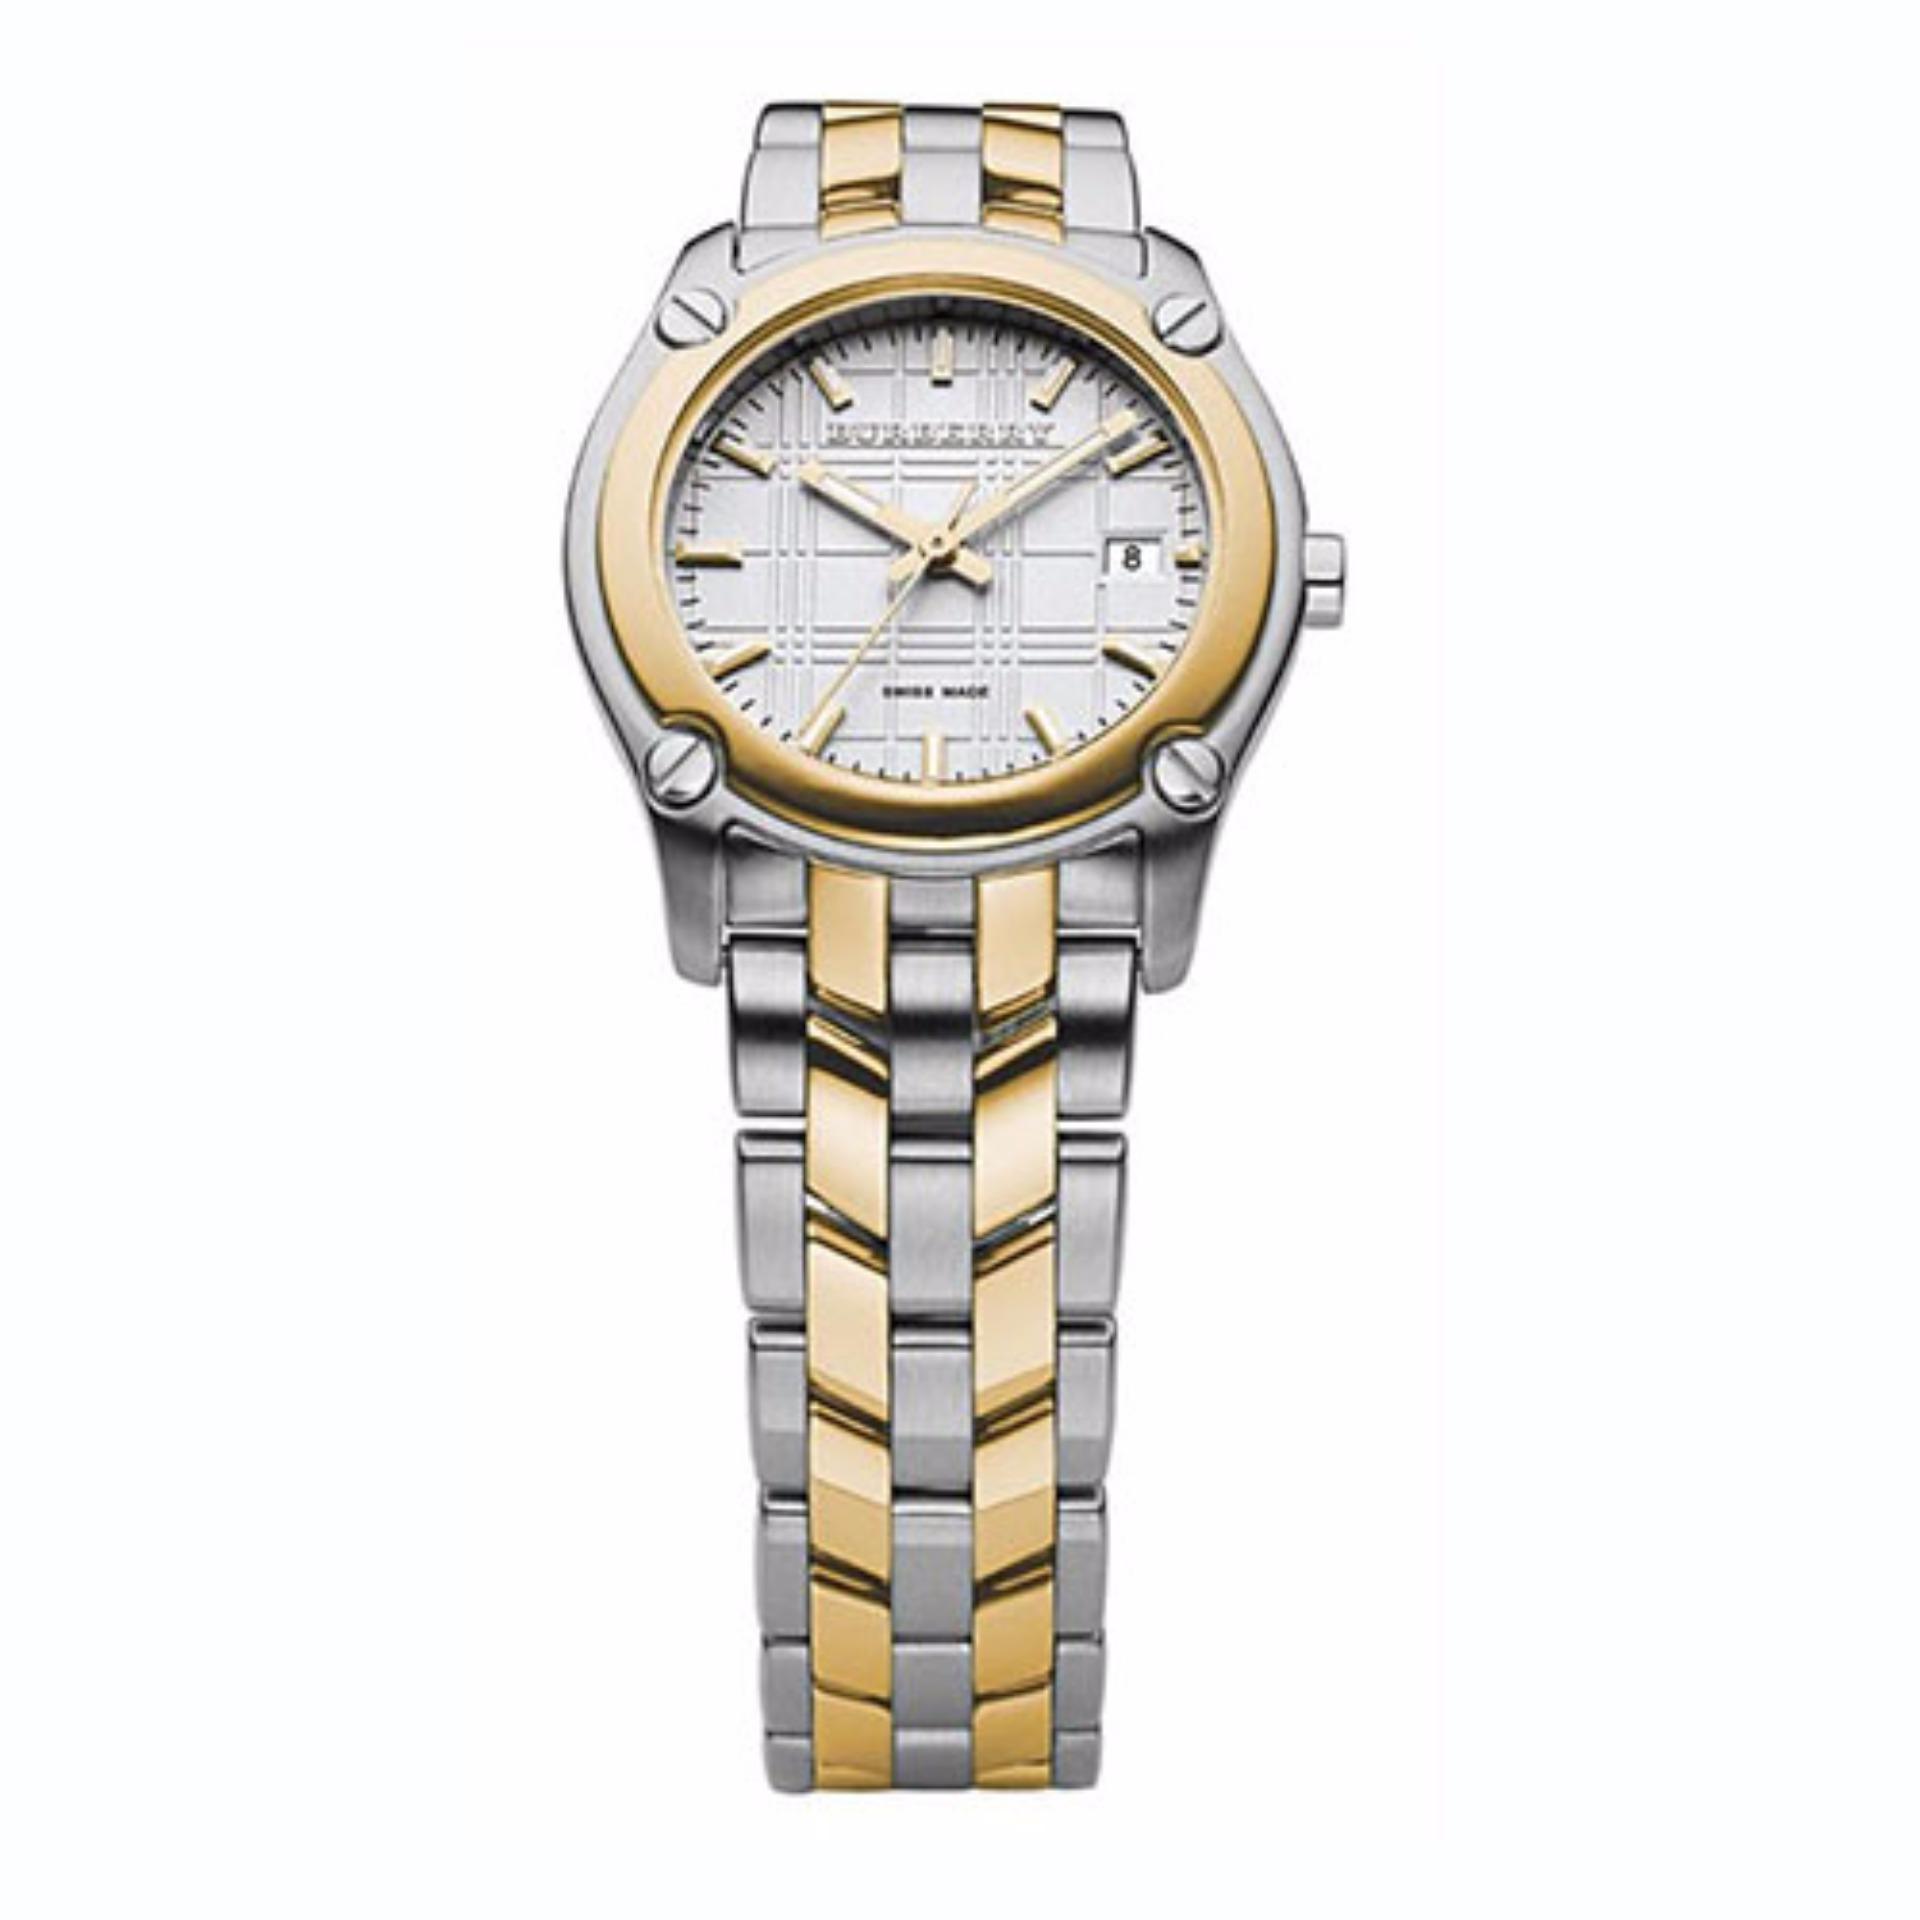 burberry gold and silver watch